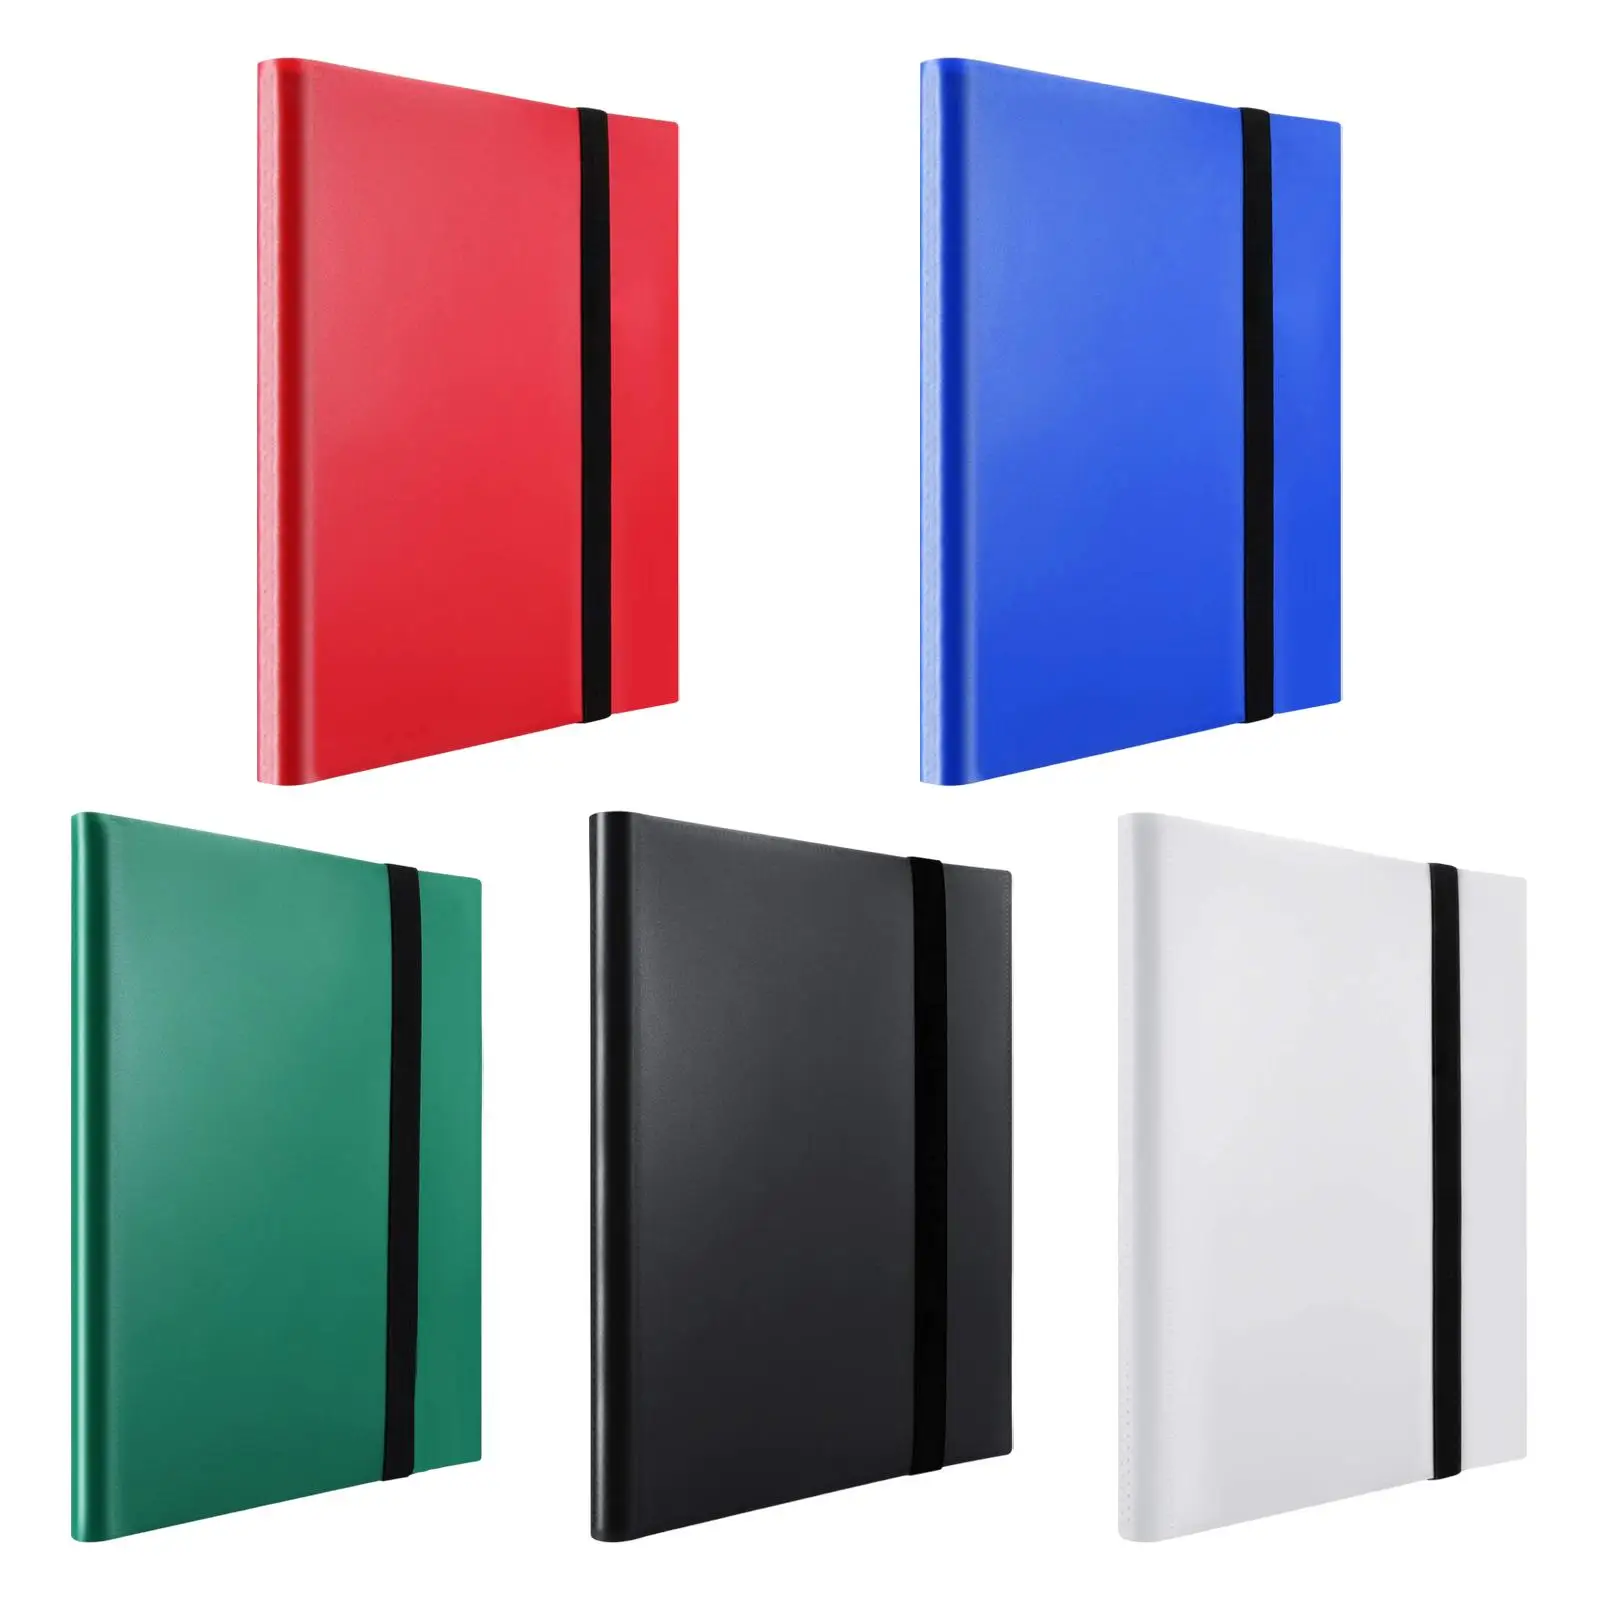 432 Double Sided Album Carrying Card Organizer Baseball Card Sleeves Storage Book Album Display Holder for Business Cards